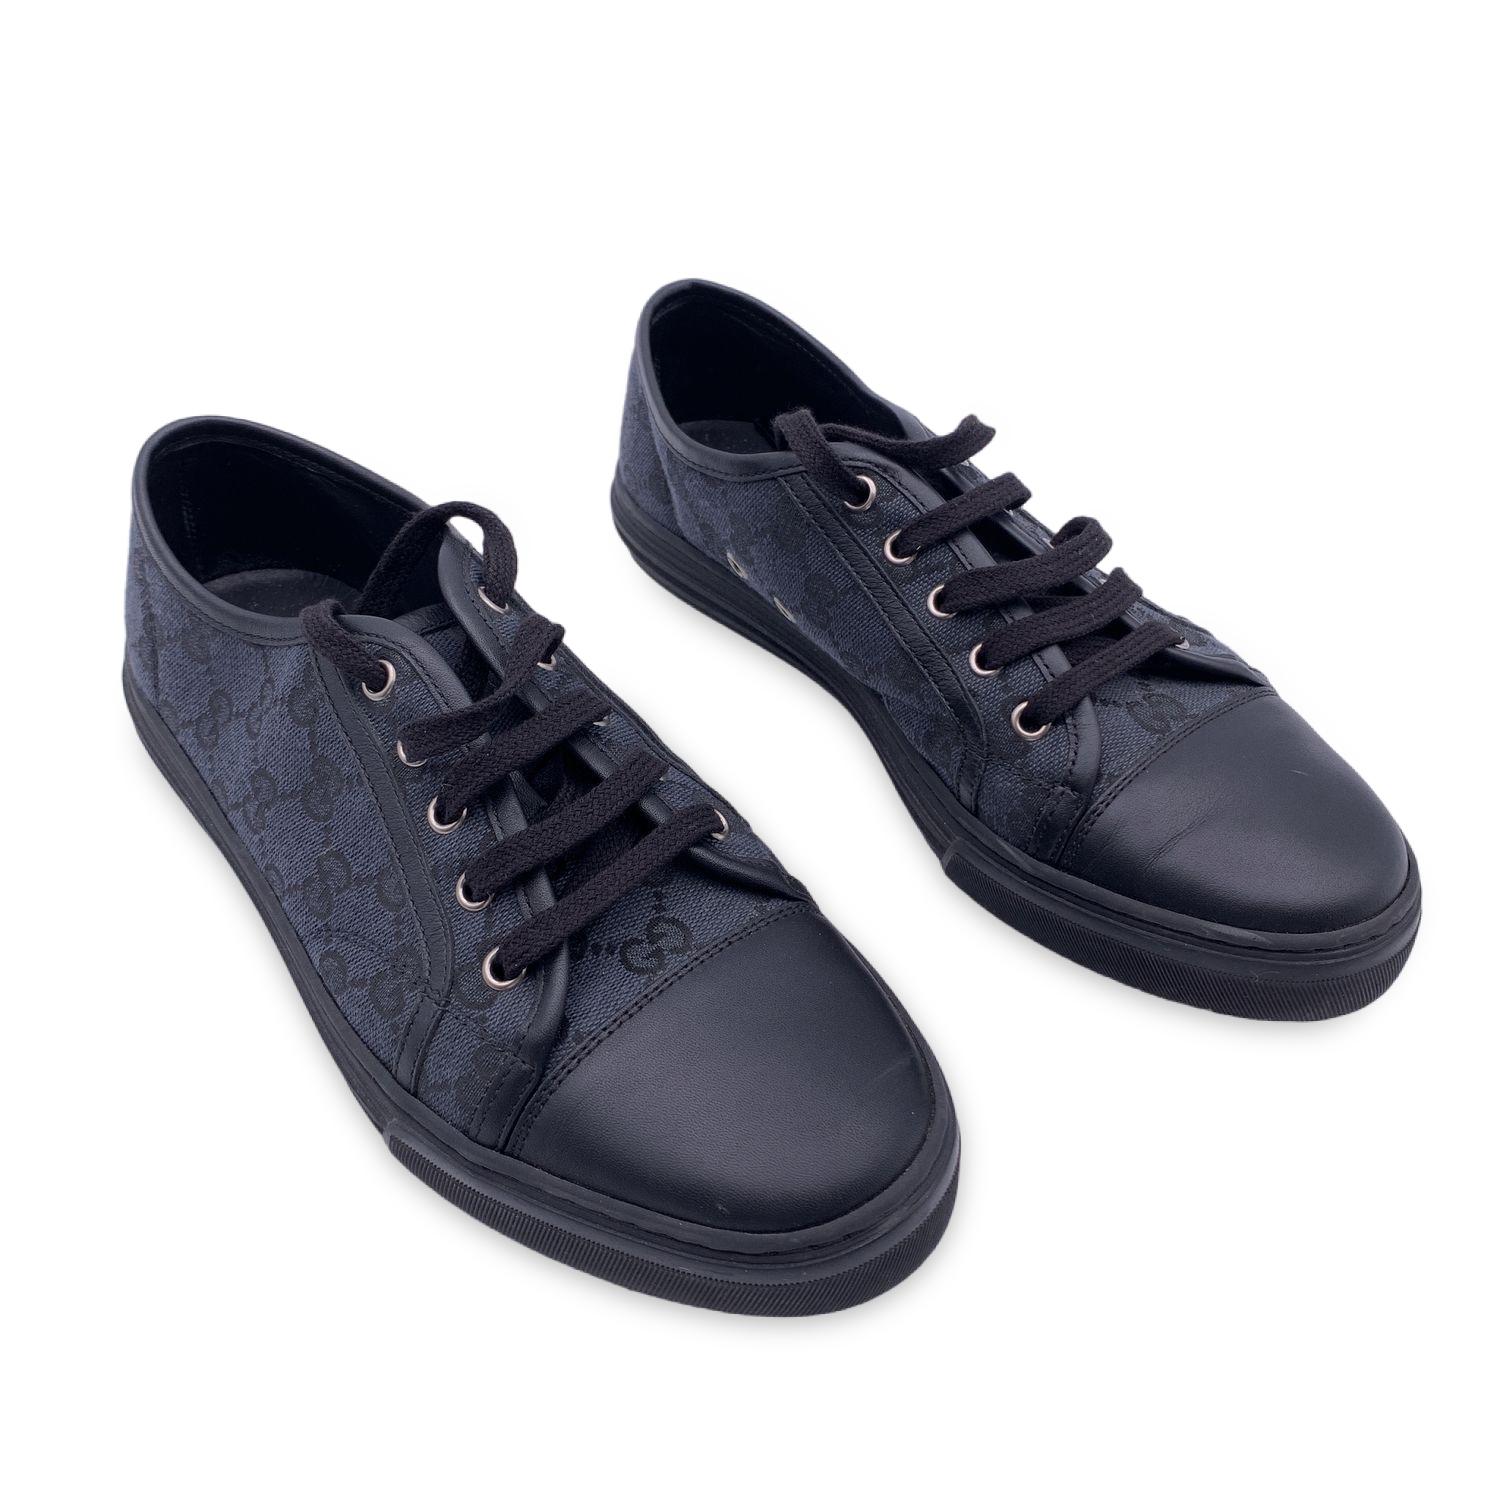 Gucci black monogram sneakers. Low-top canvas and leather sneakers Round toe. Lace-up closure in black. Rubber outsoles. Size 40

Details

MATERIAL: Cloth

COLOR: Black

MODEL: n.a.

GENDER: Unisex Adults

COUNTRY OF MANUFACTURE: Italy

STYLE: